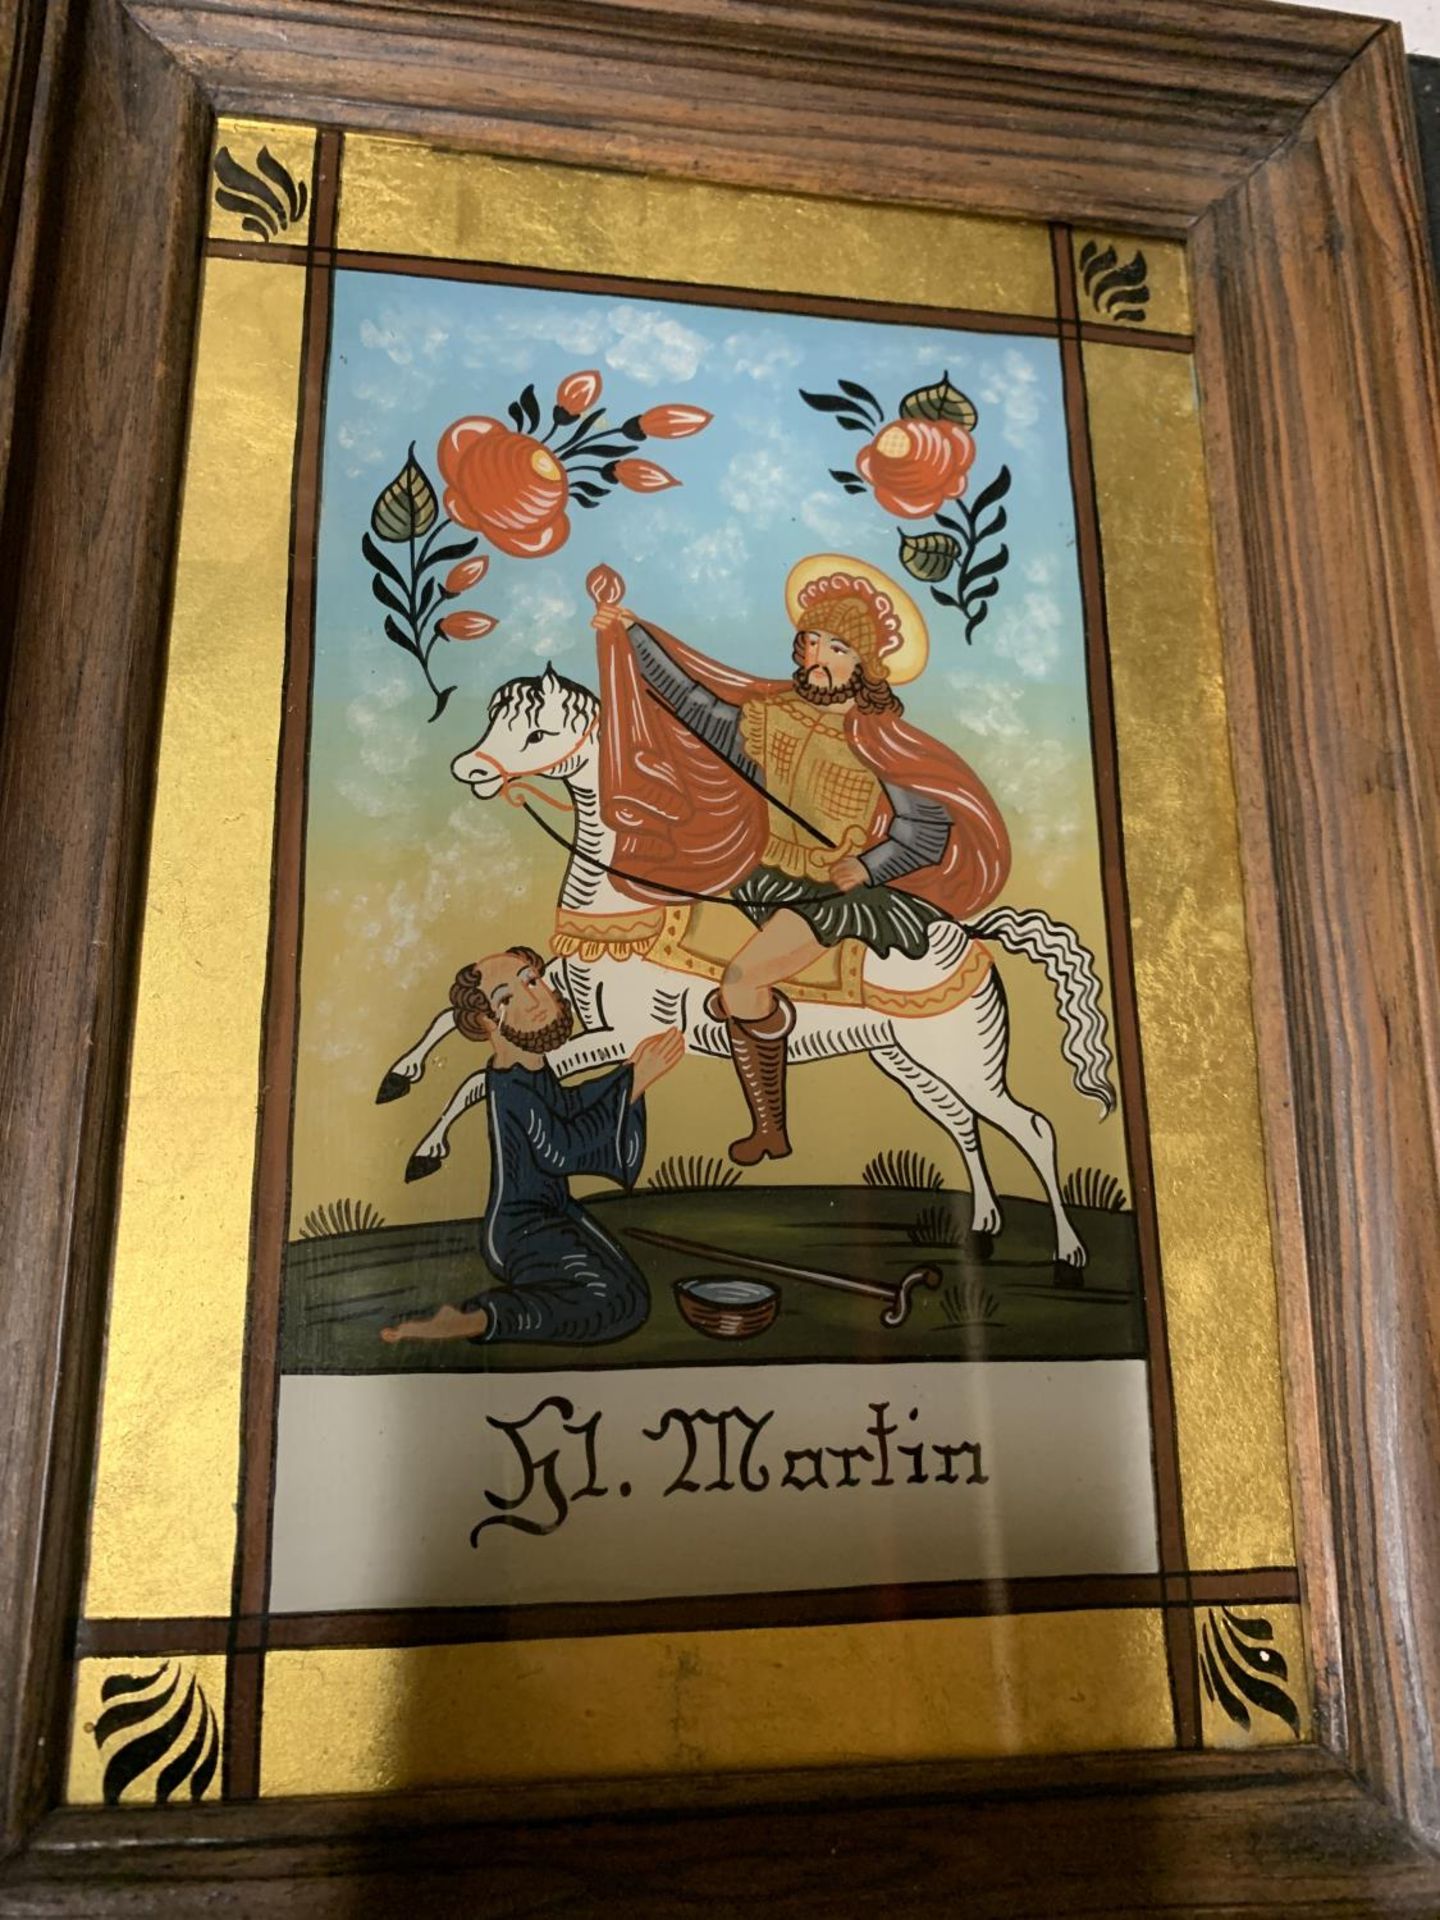 TWO REVERSE GLASS PAINTINGS OF 'FELICITAS' AND 'MARTIN' - Image 2 of 3